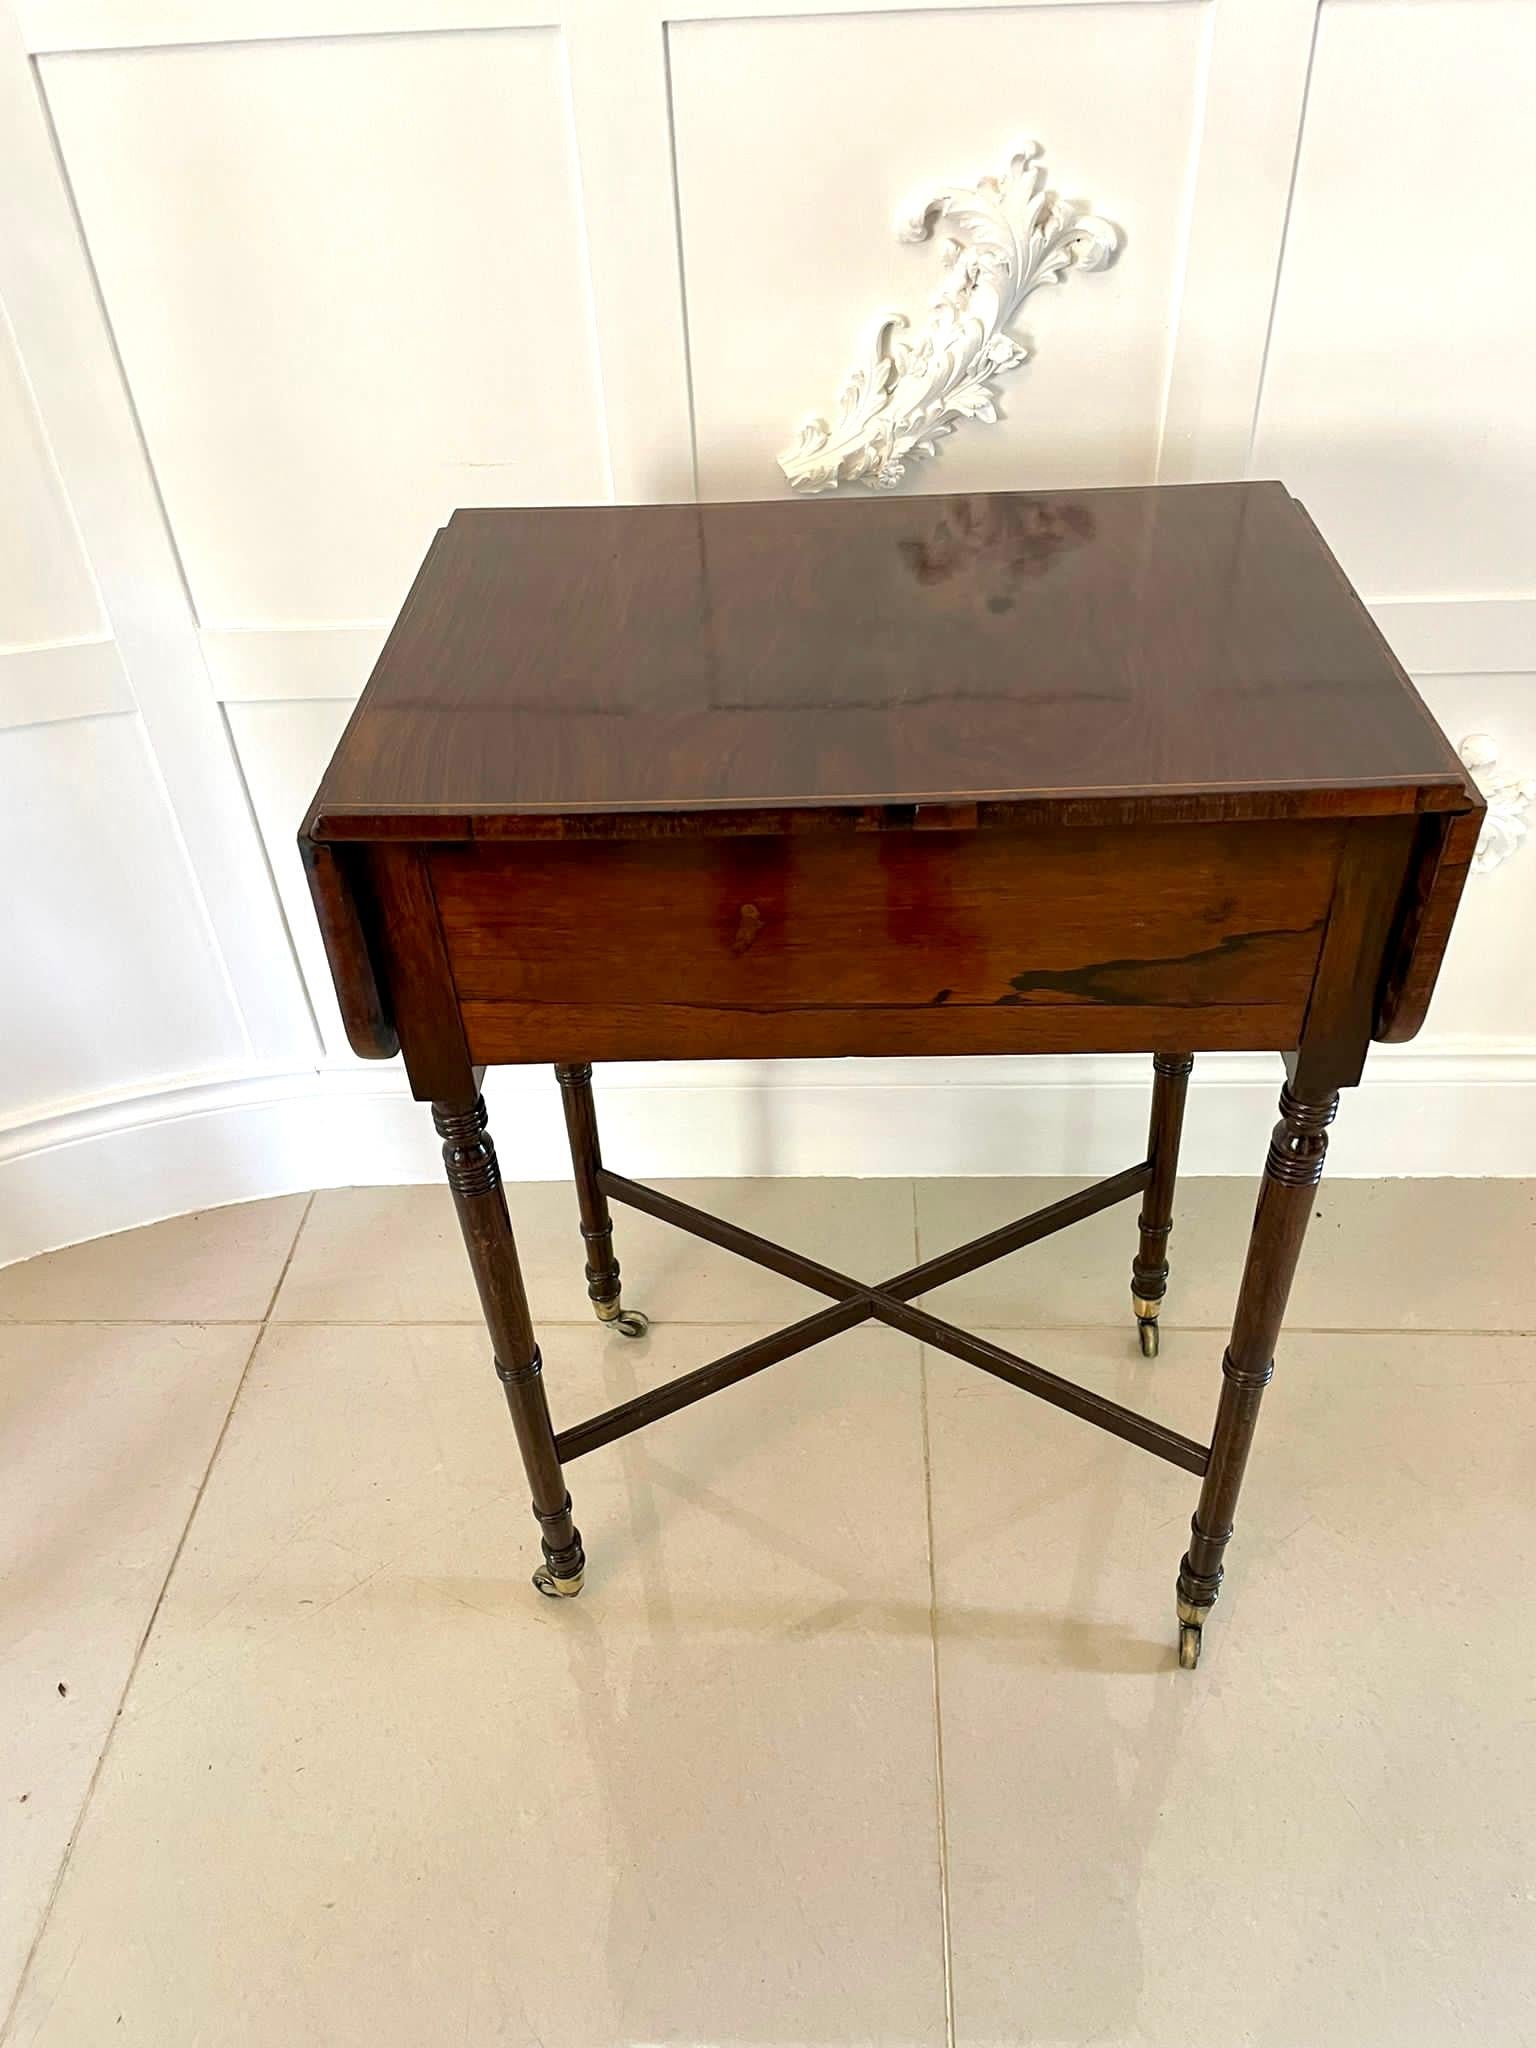 Antique Quality Rosewood Freestanding Drop Leaf Lamp Table by Druce & Co London For Sale 2